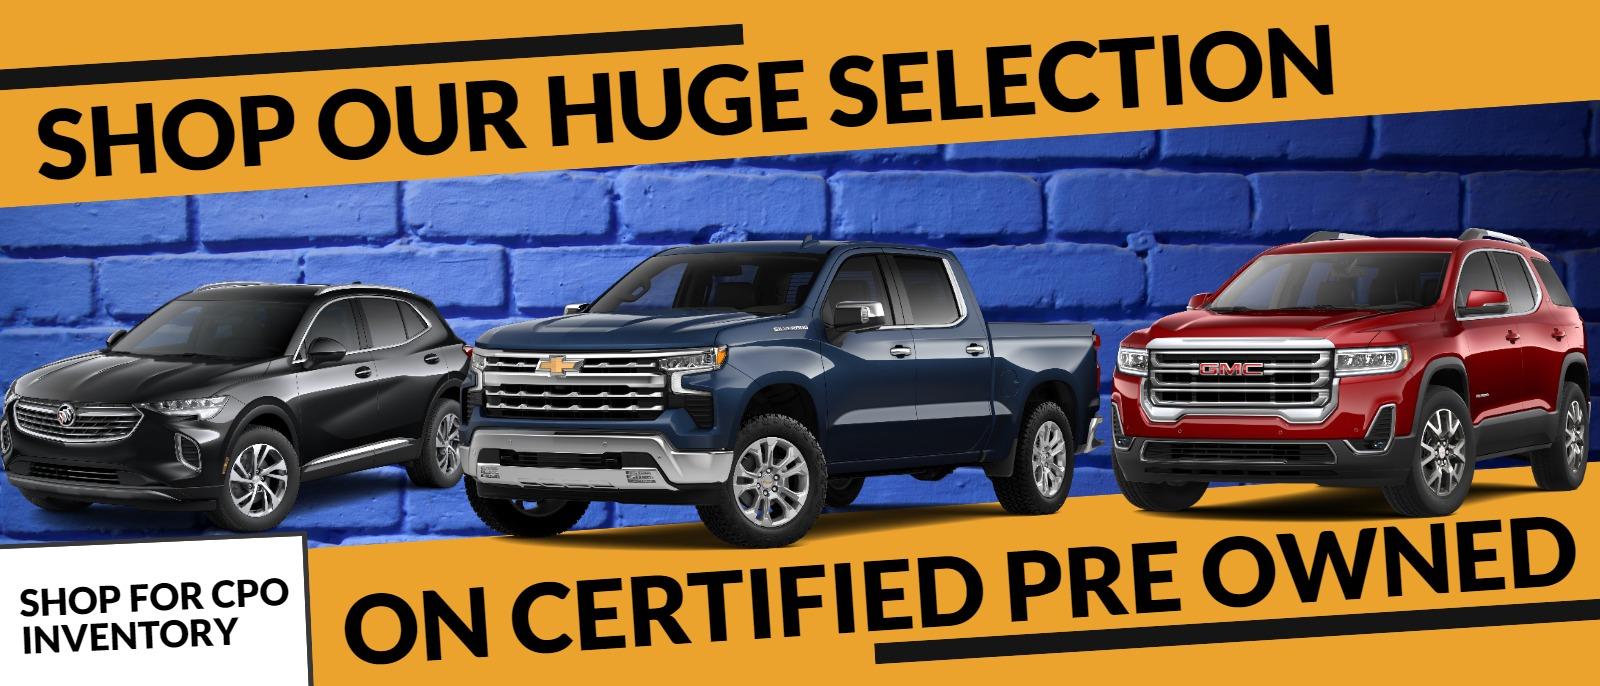 Shop Our Huge Selection on Certified Pre-owned